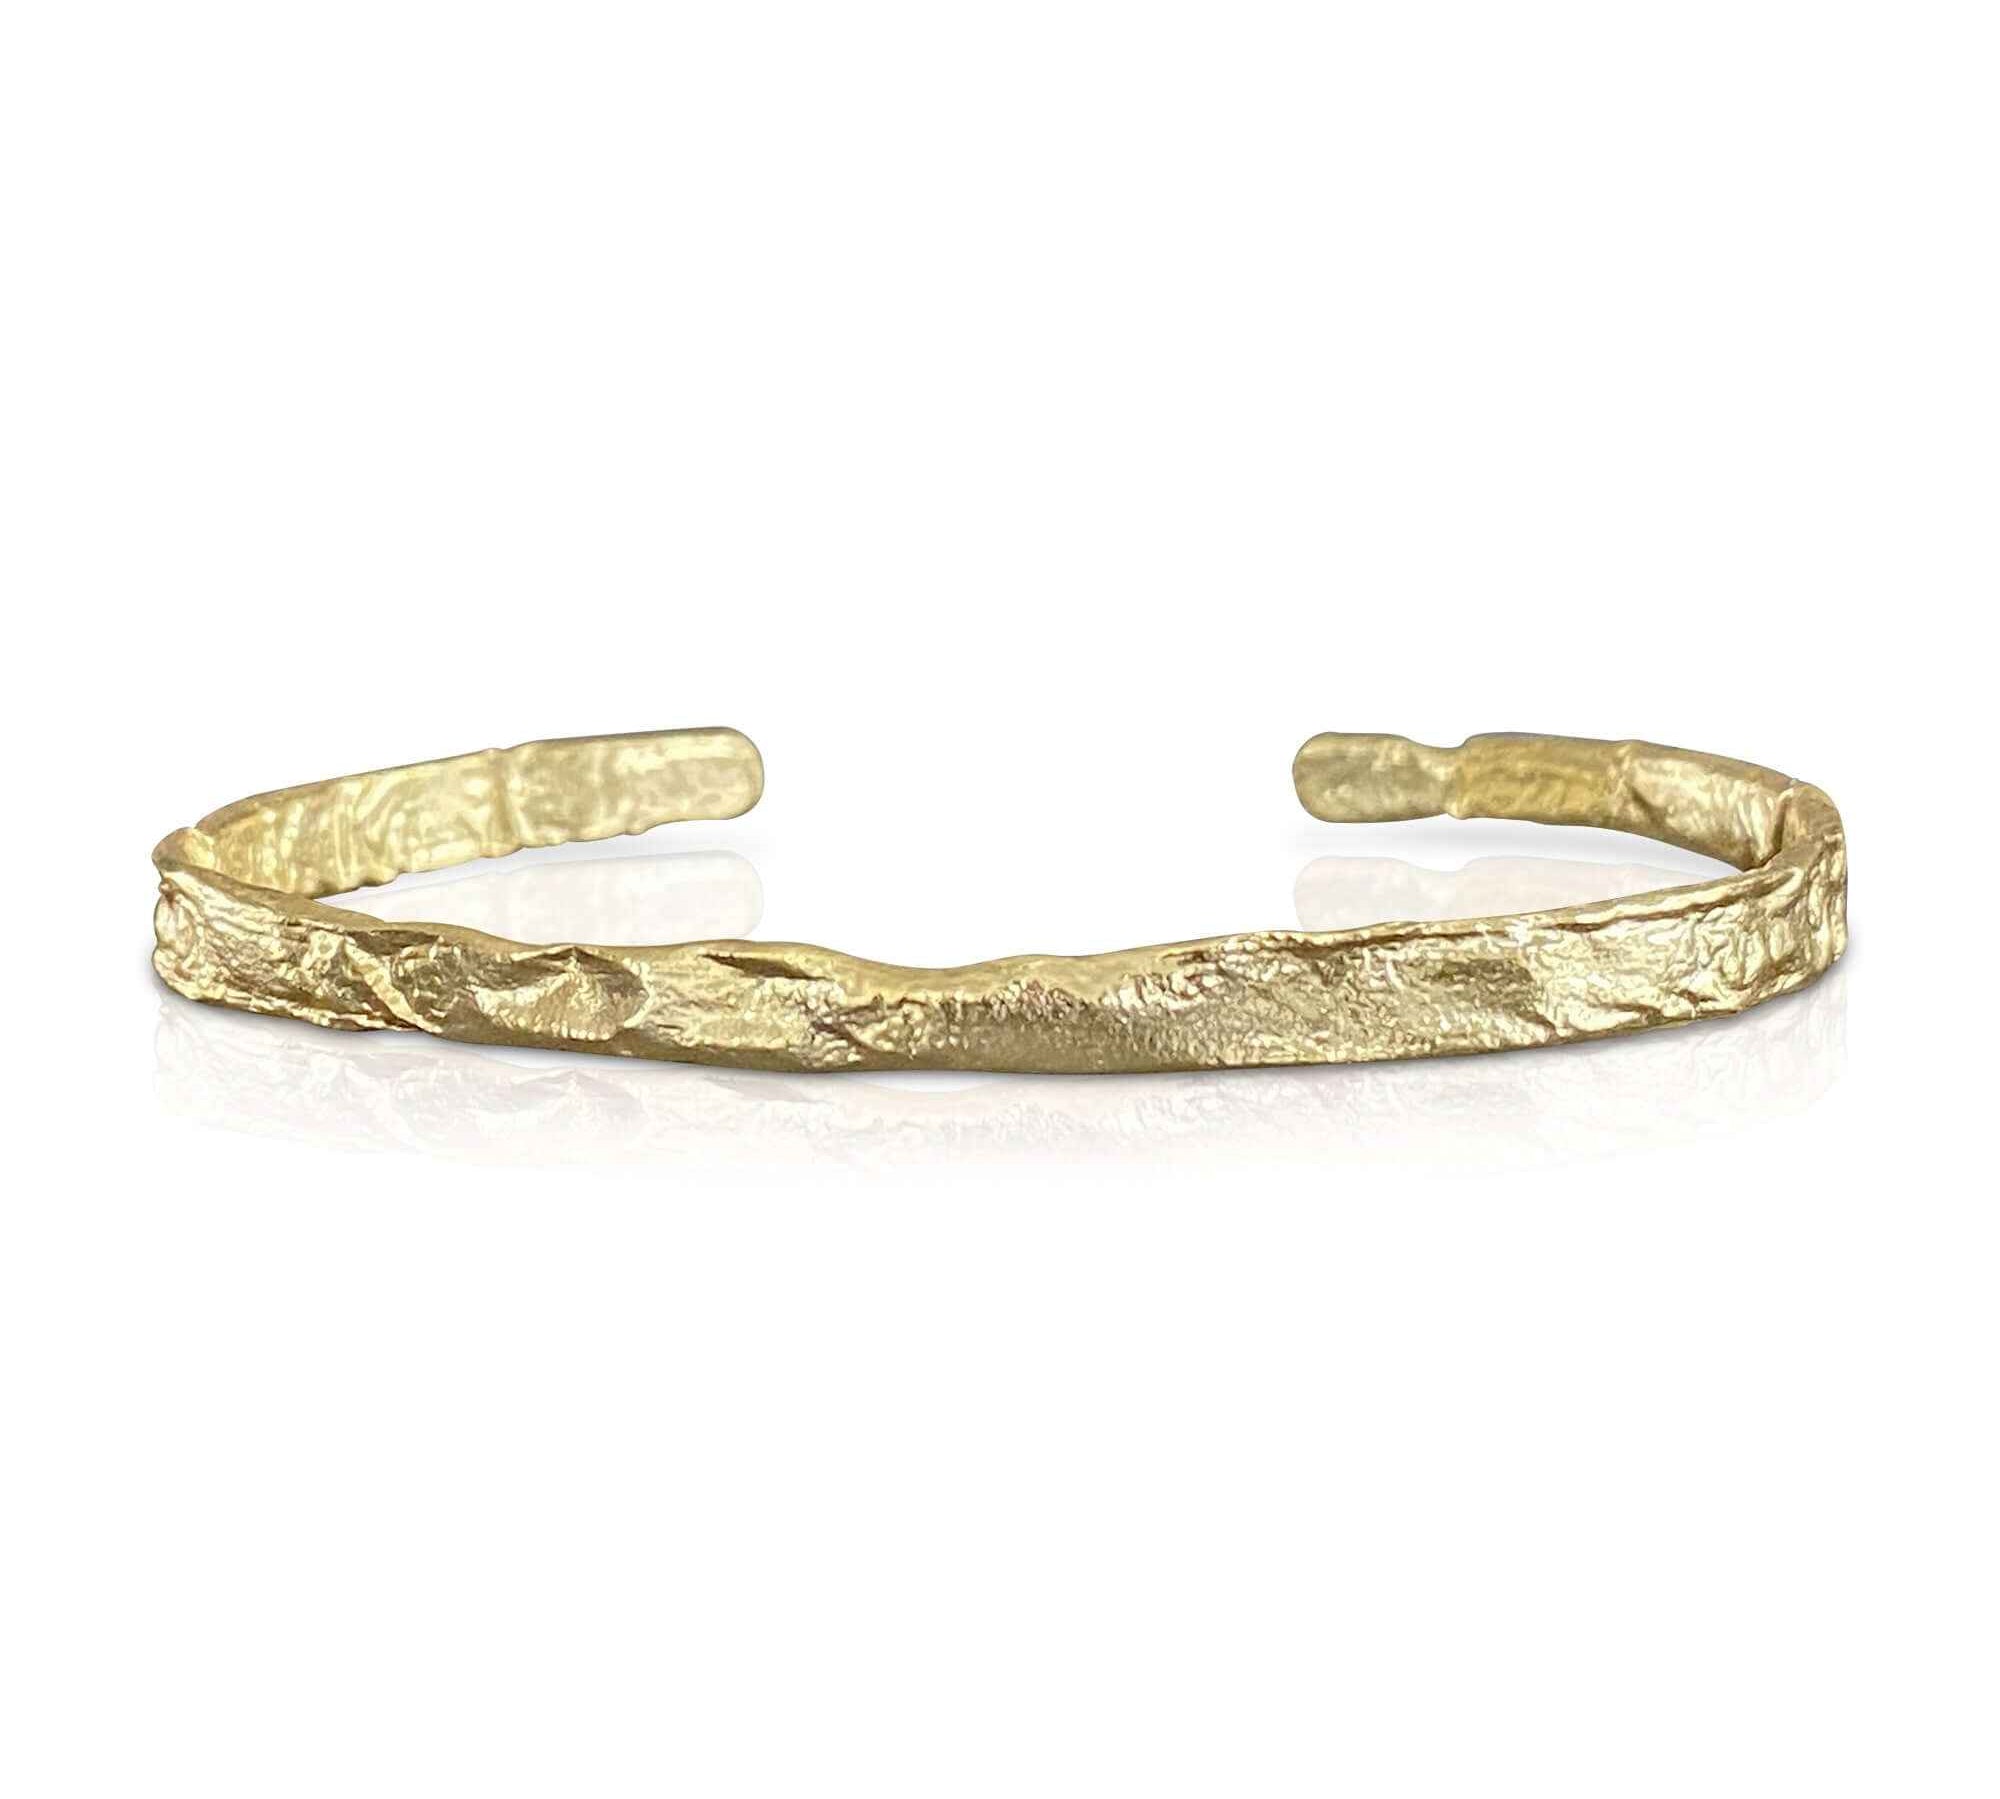 Elegant 18k gold-plated foil textured bangle bracelet by Alessandra James, reflecting quiet luxury trend.